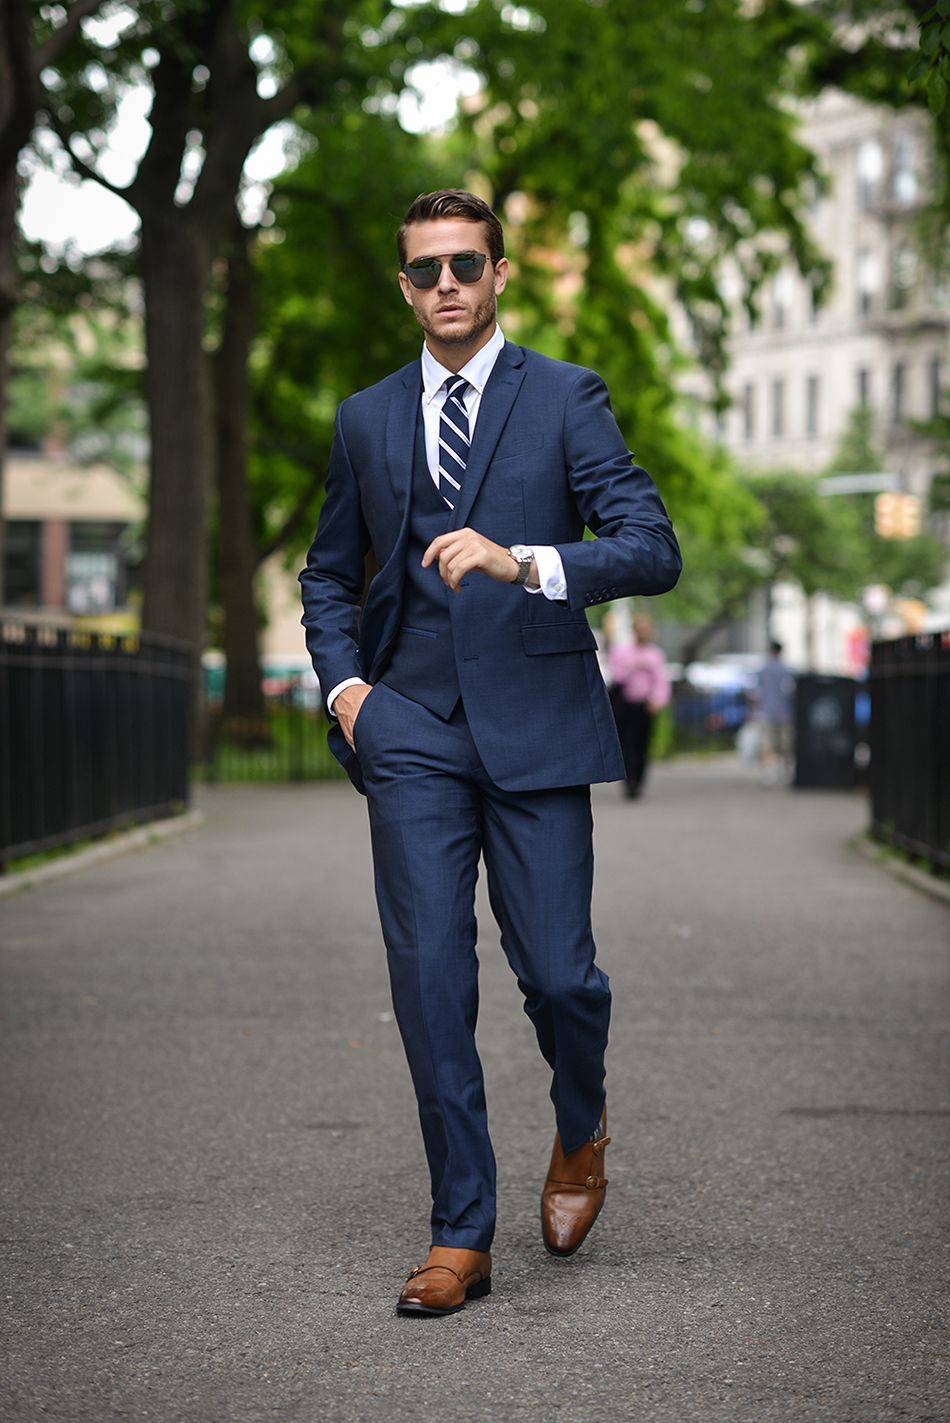 Tomaz Essential Guide to Choosing The Right Color of Suit – Tomaz Shoes